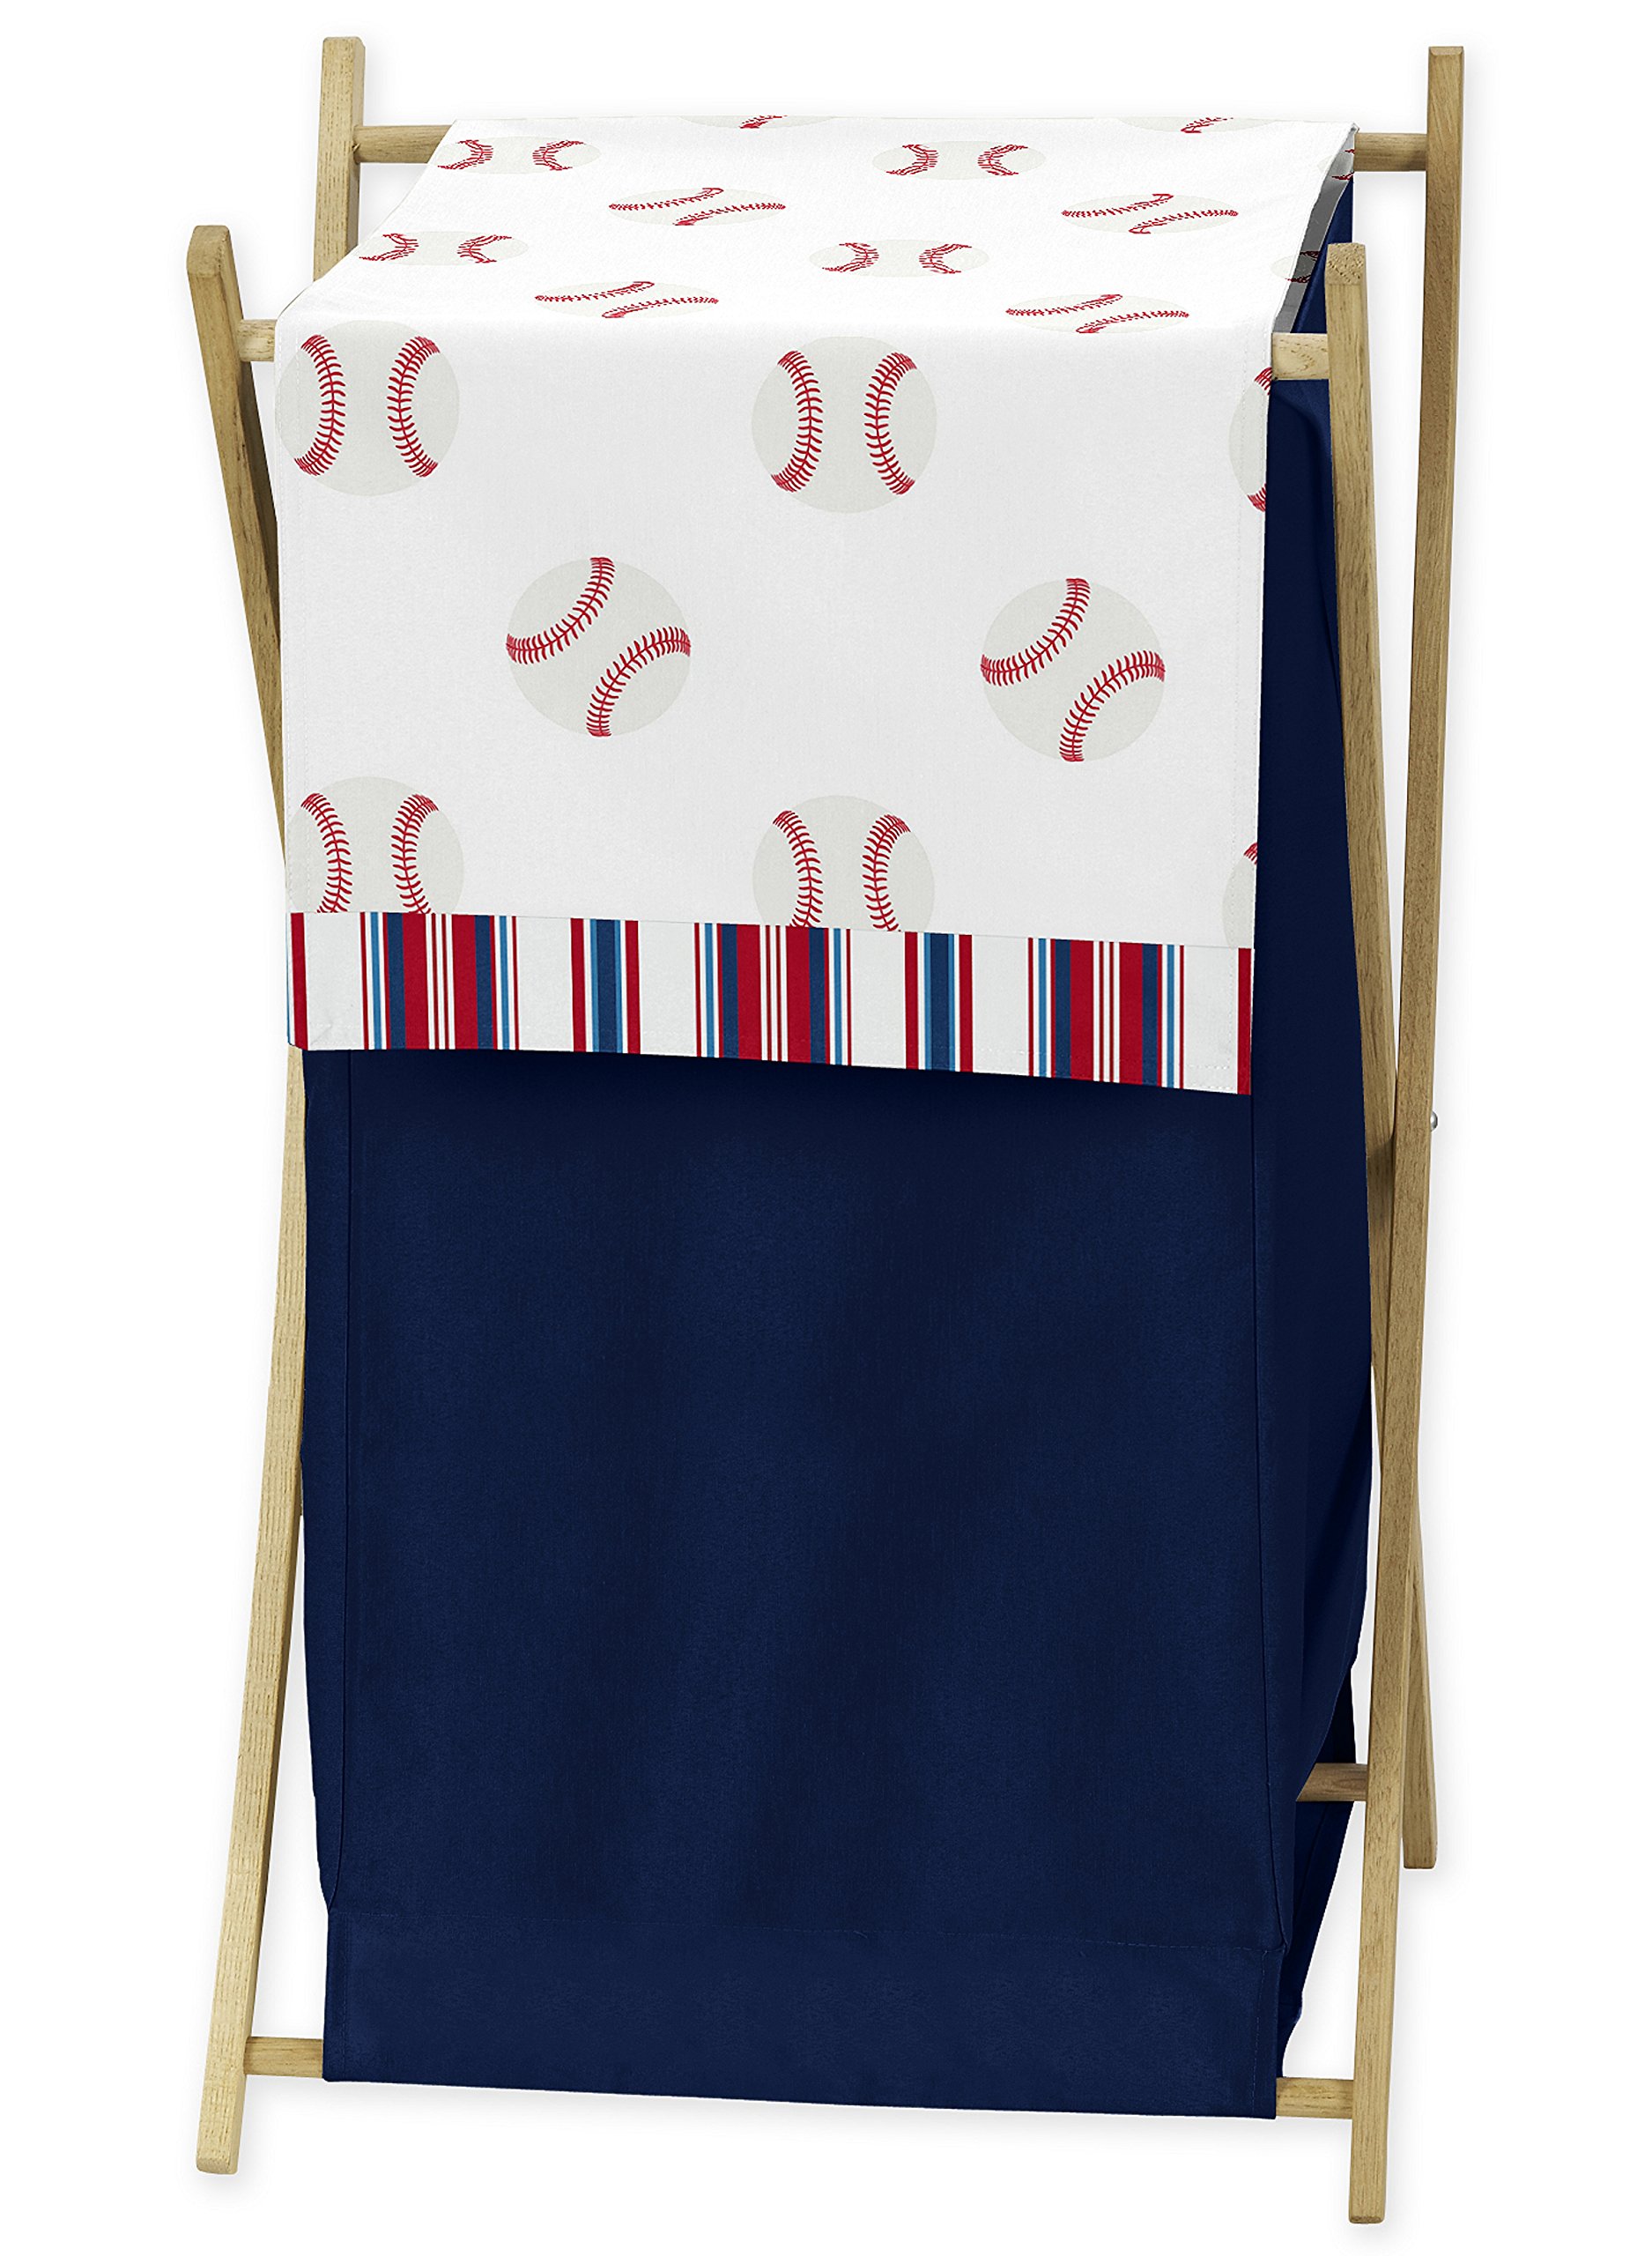 Sweet Jojo Designs Red, White and Blue Baby Kid clothes Laundry Hamper for Baseball Patch Sports collection